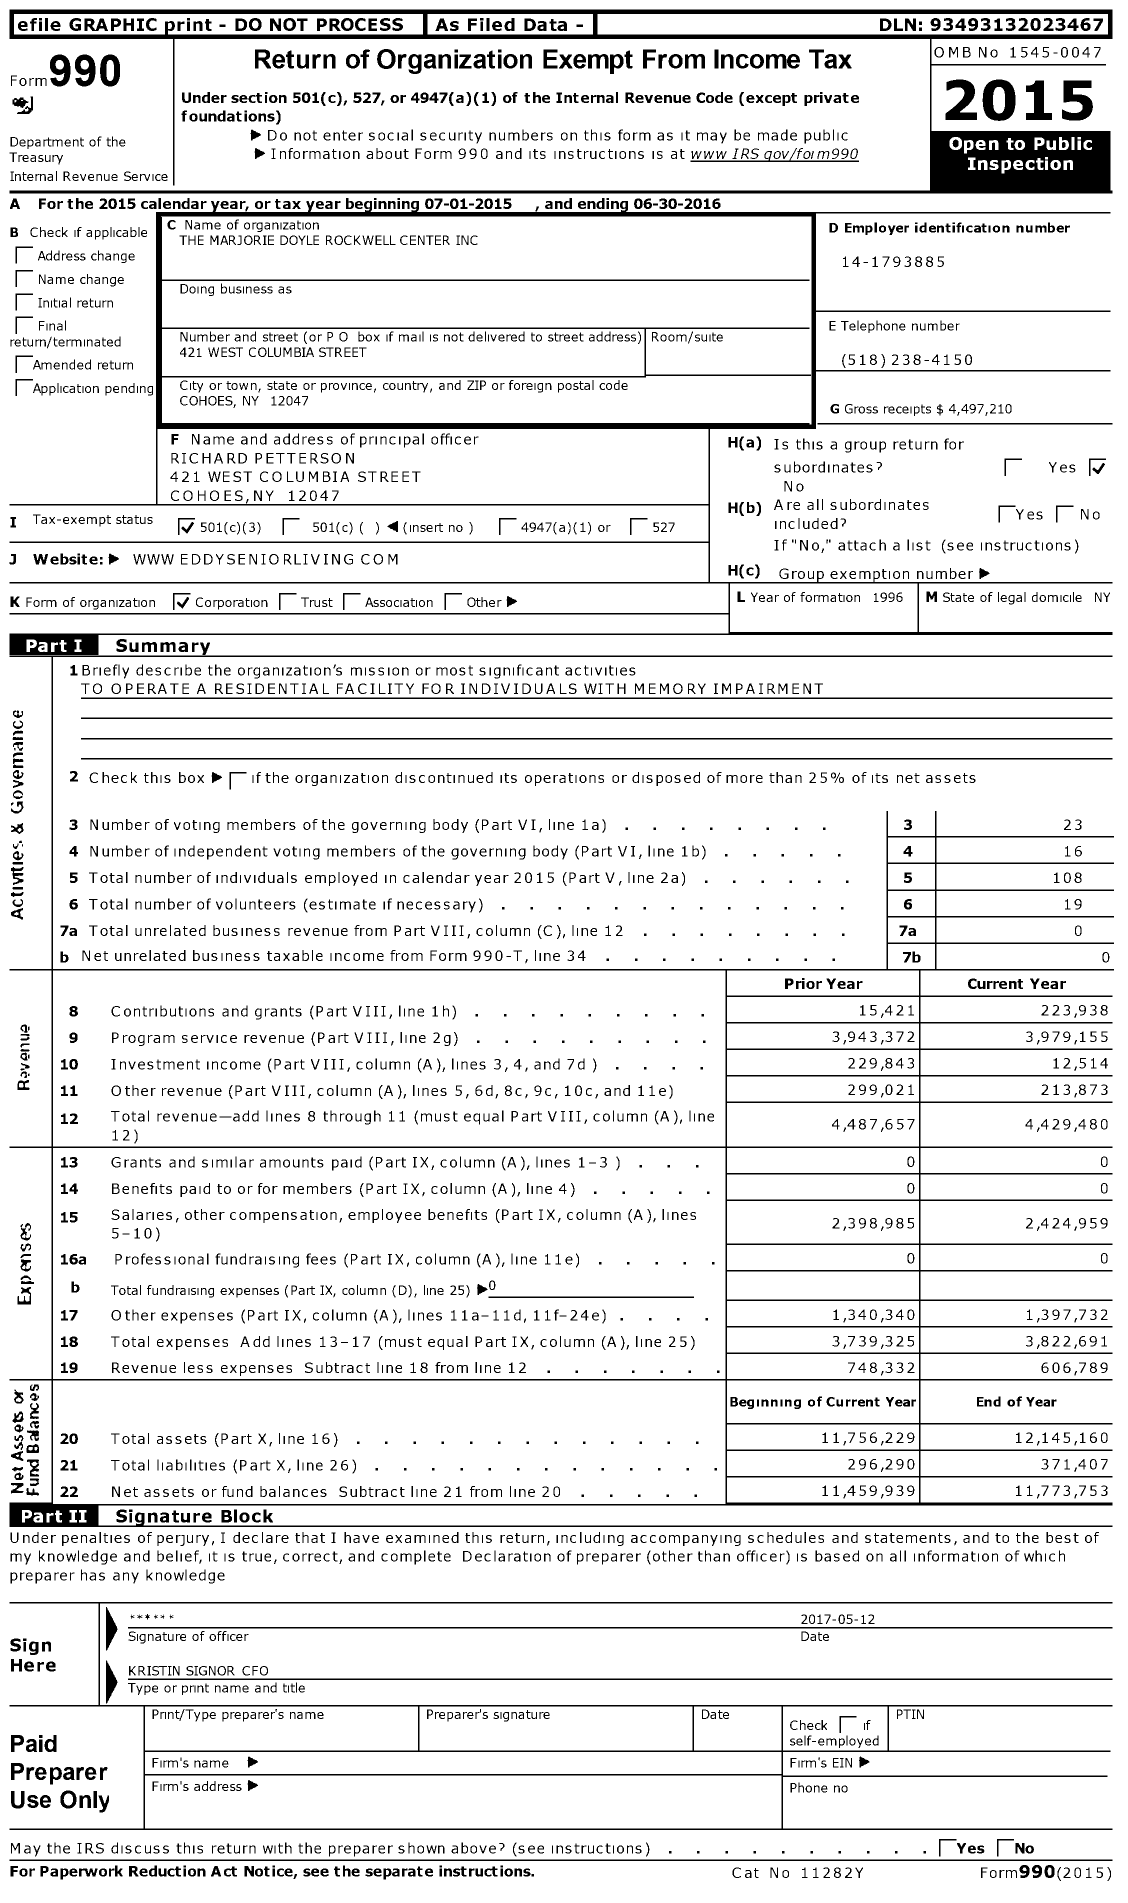 Image of first page of 2015 Form 990 for Marjorie Doyle Rockwell Center